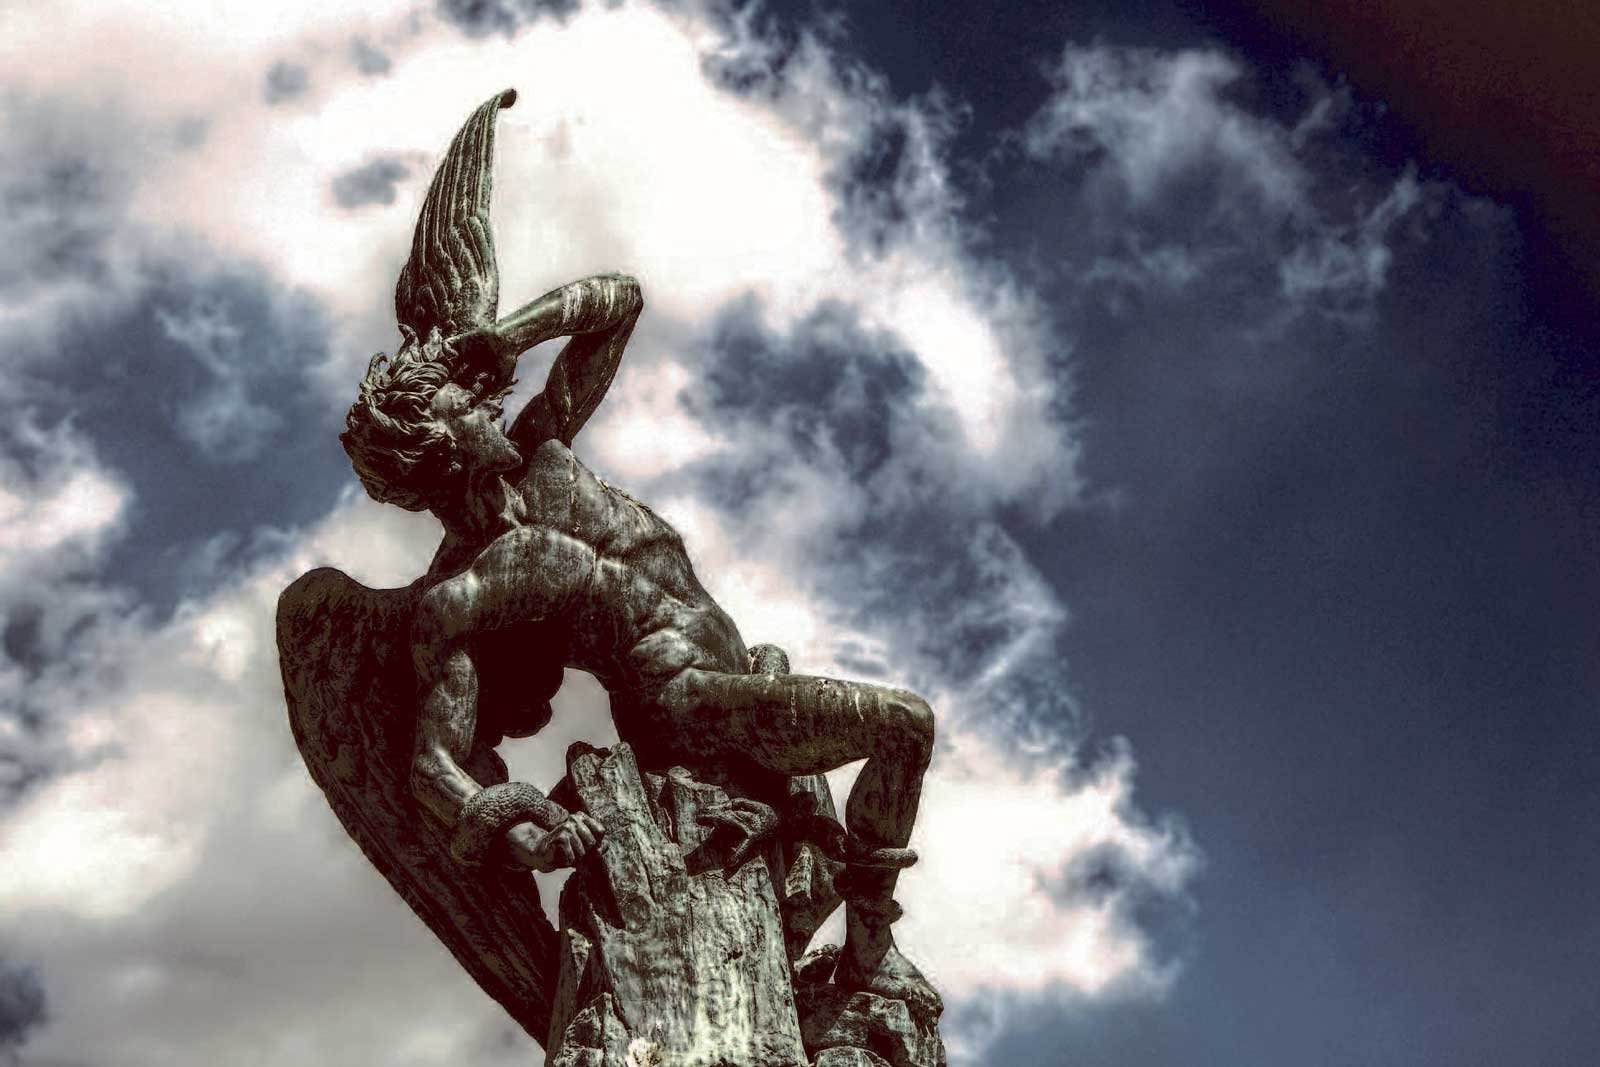 How to see the statue of Lucifer in Madrid